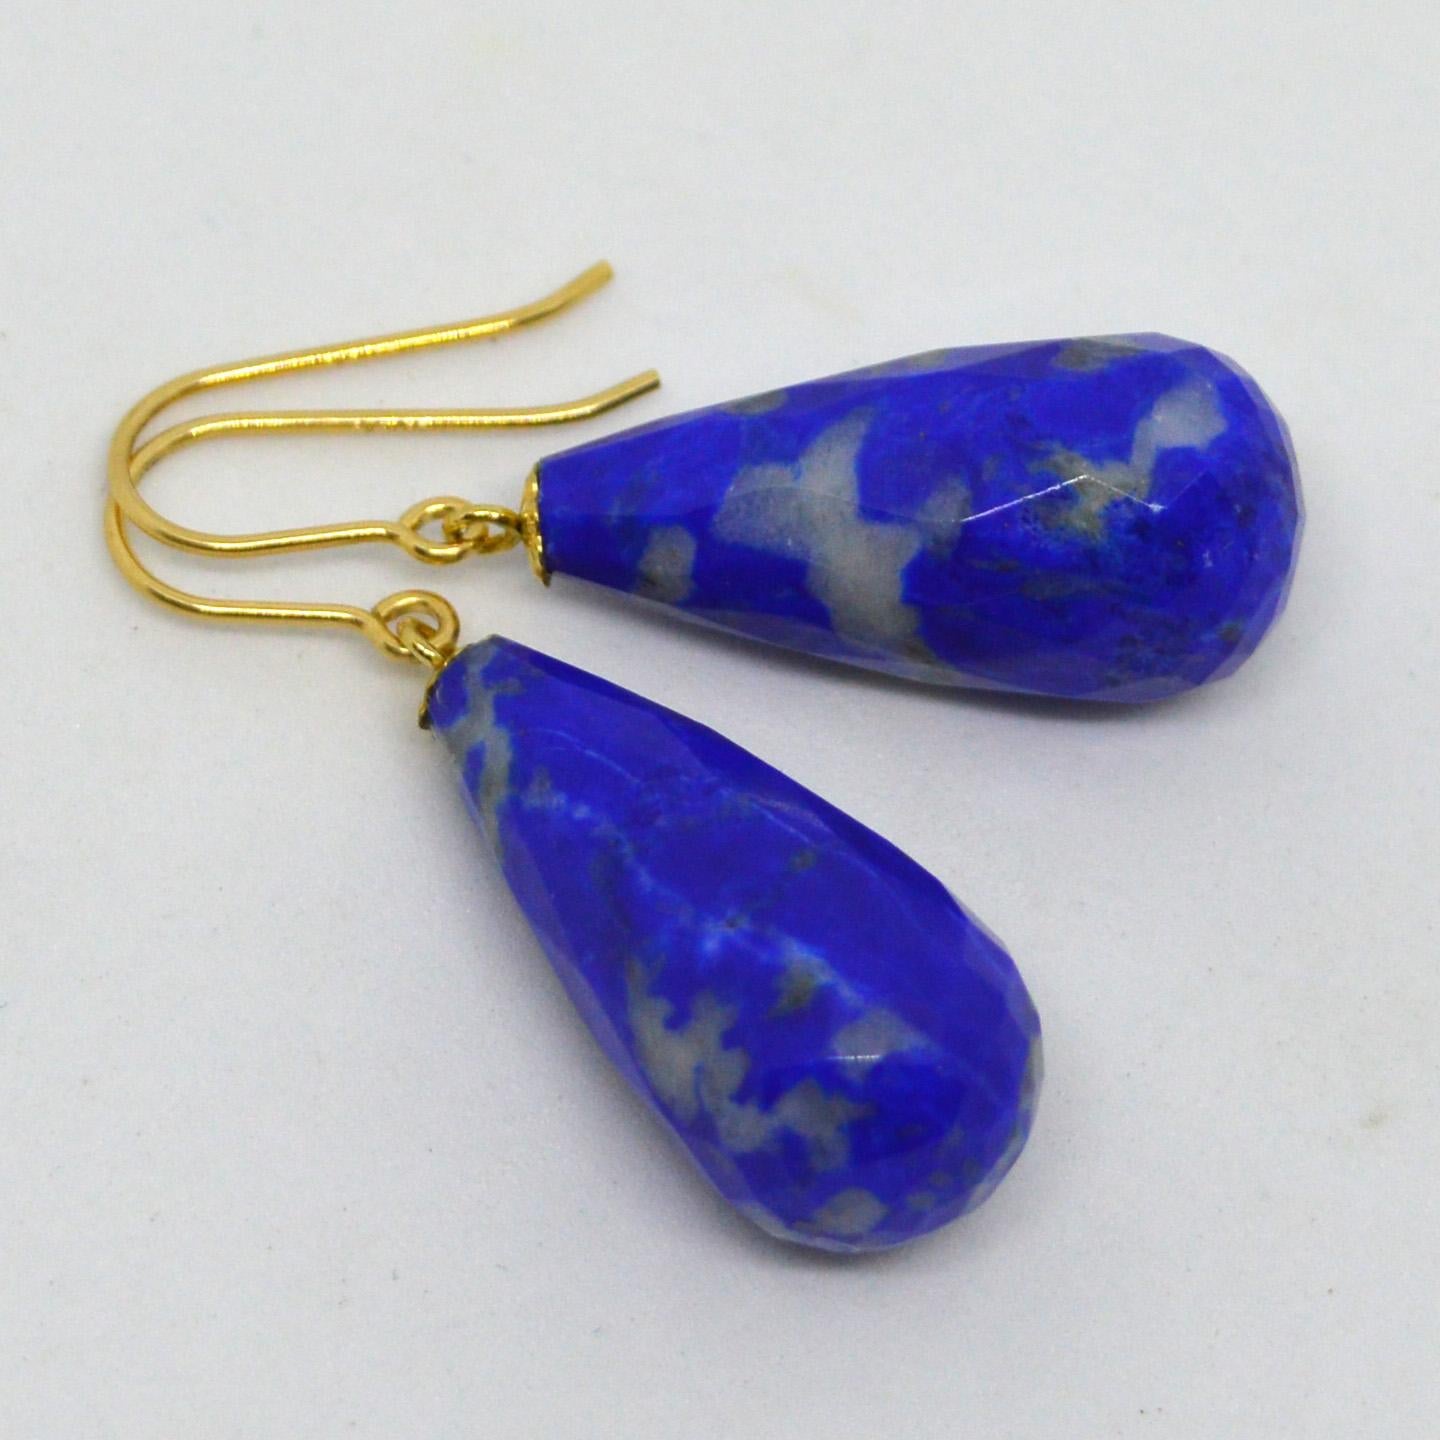 Decadent Jewels Lapis Lazuli Gold Earrings
Description
Lapis Lazuli Faceted drop 8.7x 5mm
Gold Filled Cap and Shephard Hook
Total Earring Length 4cm / 1.77 inches
Total Weight 10.5g